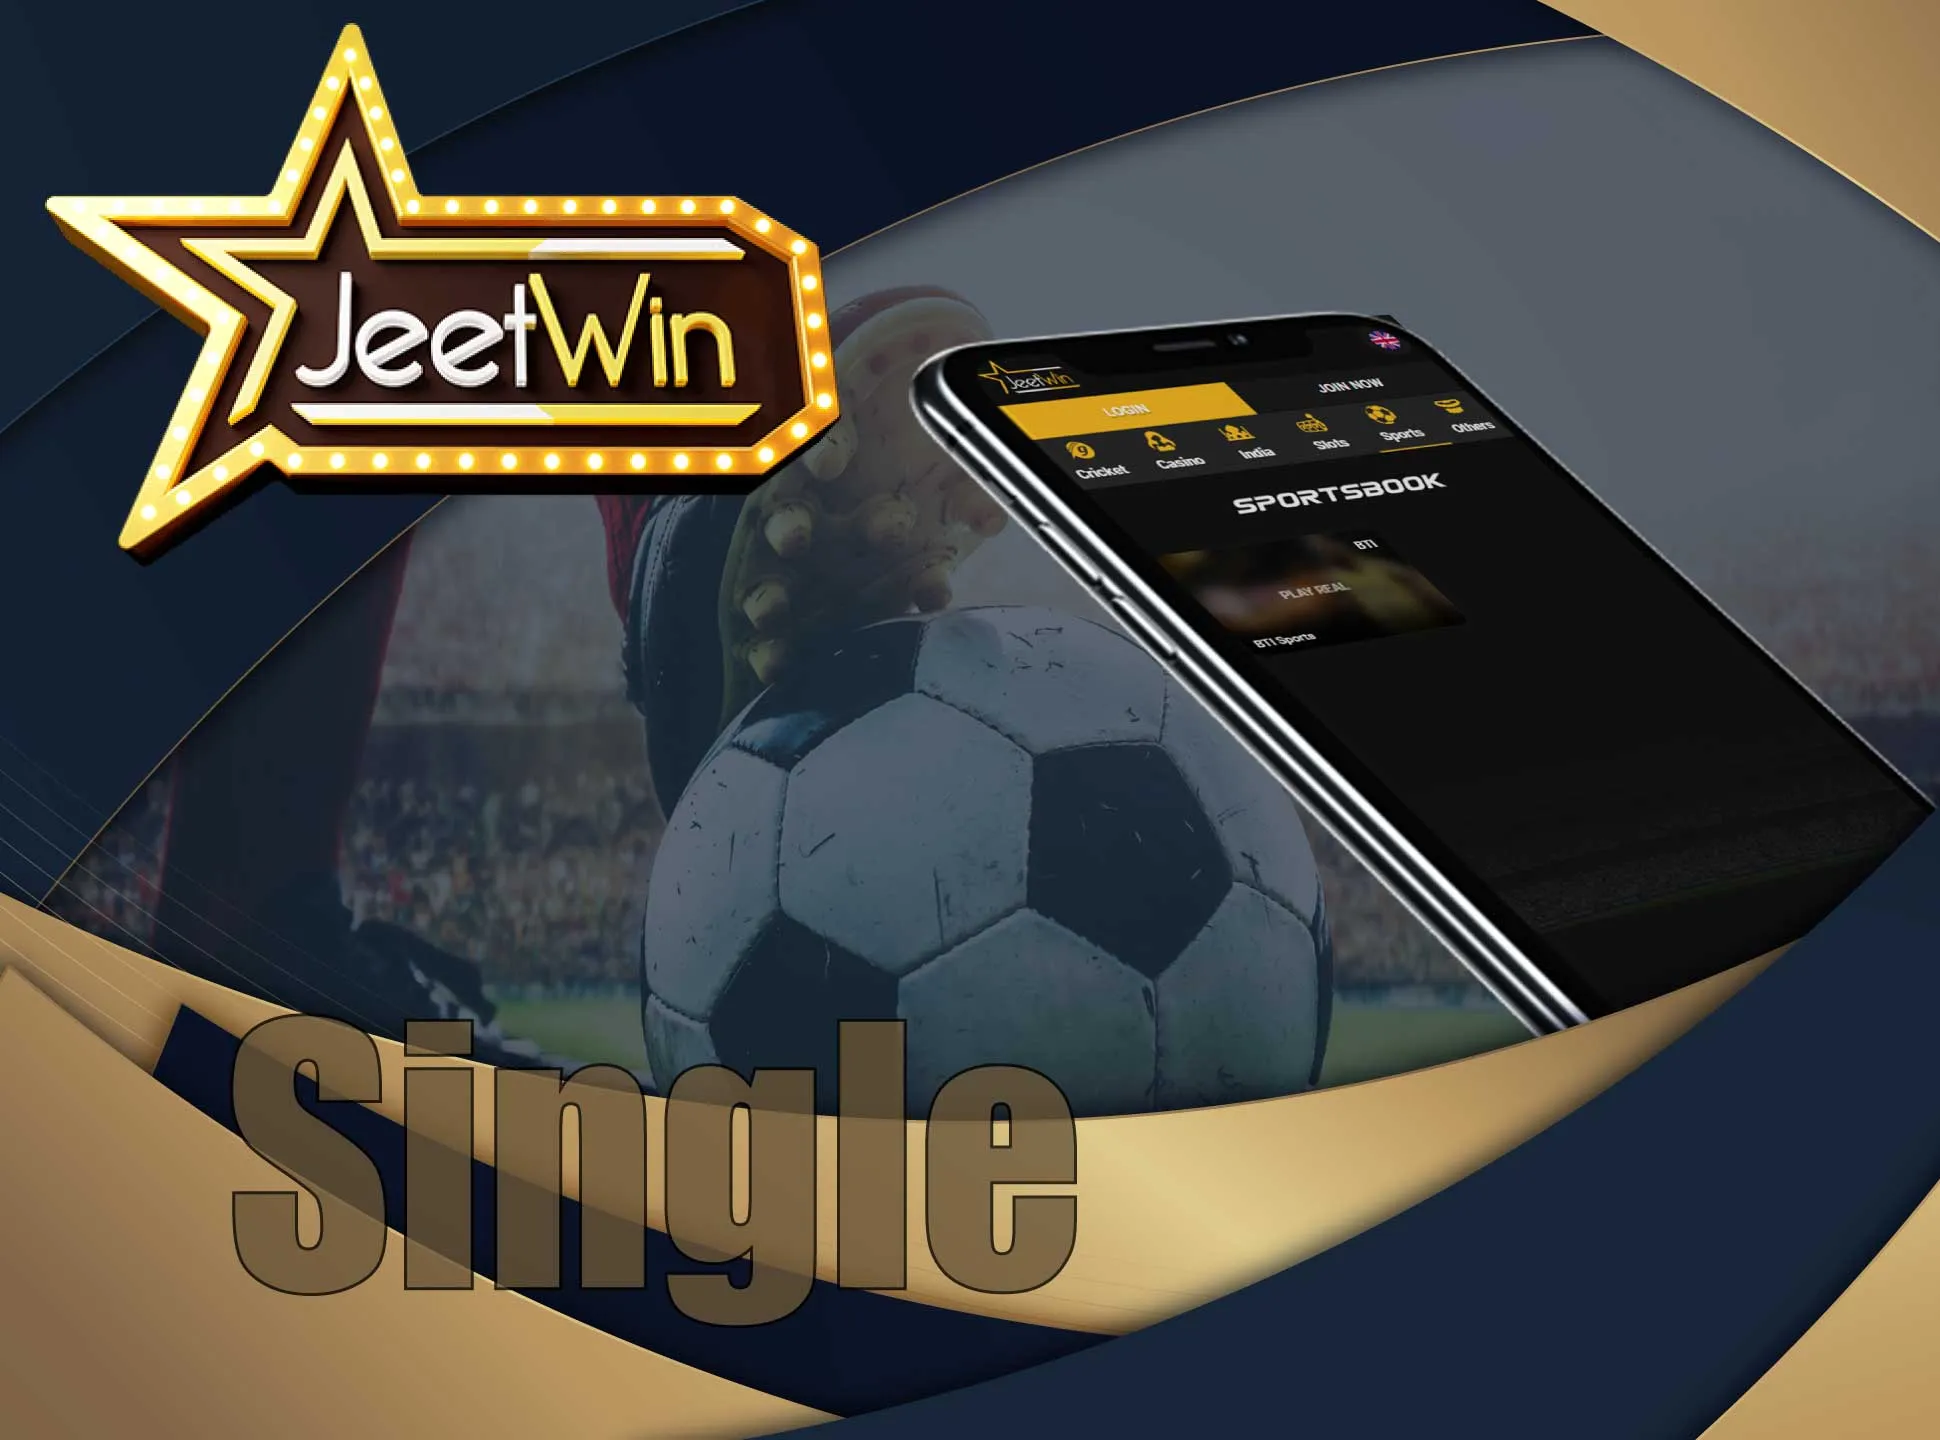 Place single bets if you are new to betting on Jeetwin.